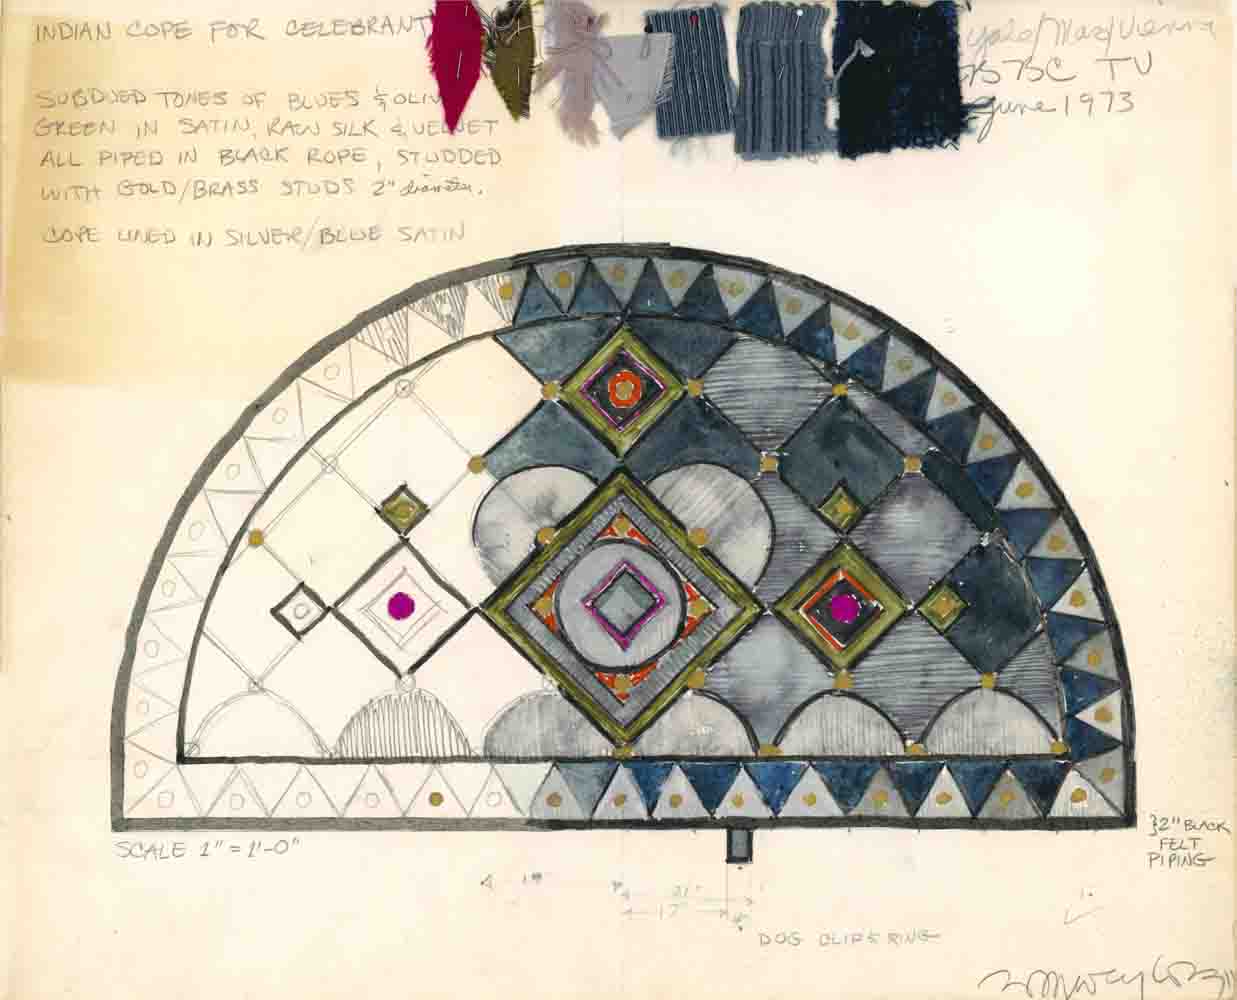 Sketch for Indian Cope for Celebrant, Leonard Bernstein’s Mass, Graphite/ Watercolor/ Gouache on paper, 16 ¾ x 13 ¾ inches